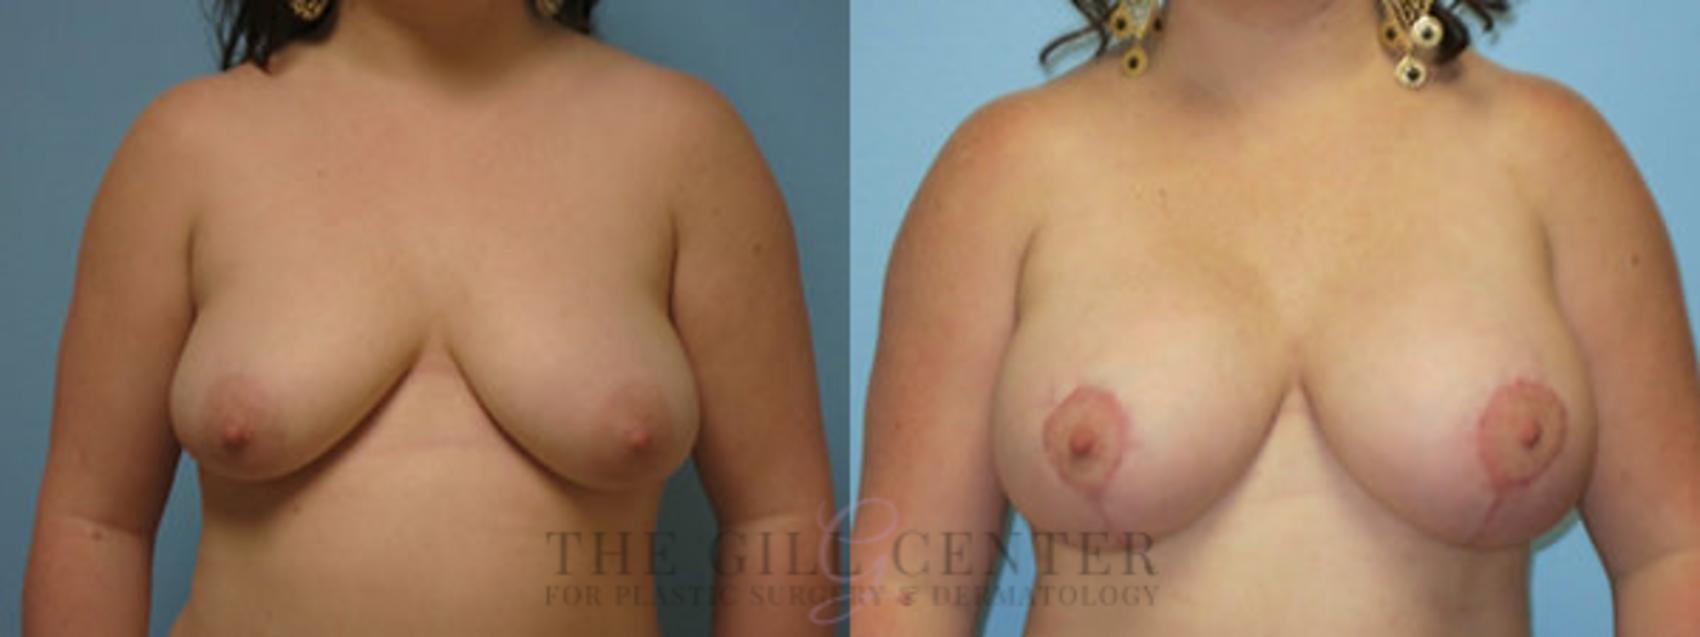 Breast Lift with Implants Case 102 Before & After Front | The Woodlands, TX | The Gill Center for Plastic Surgery and Dermatology